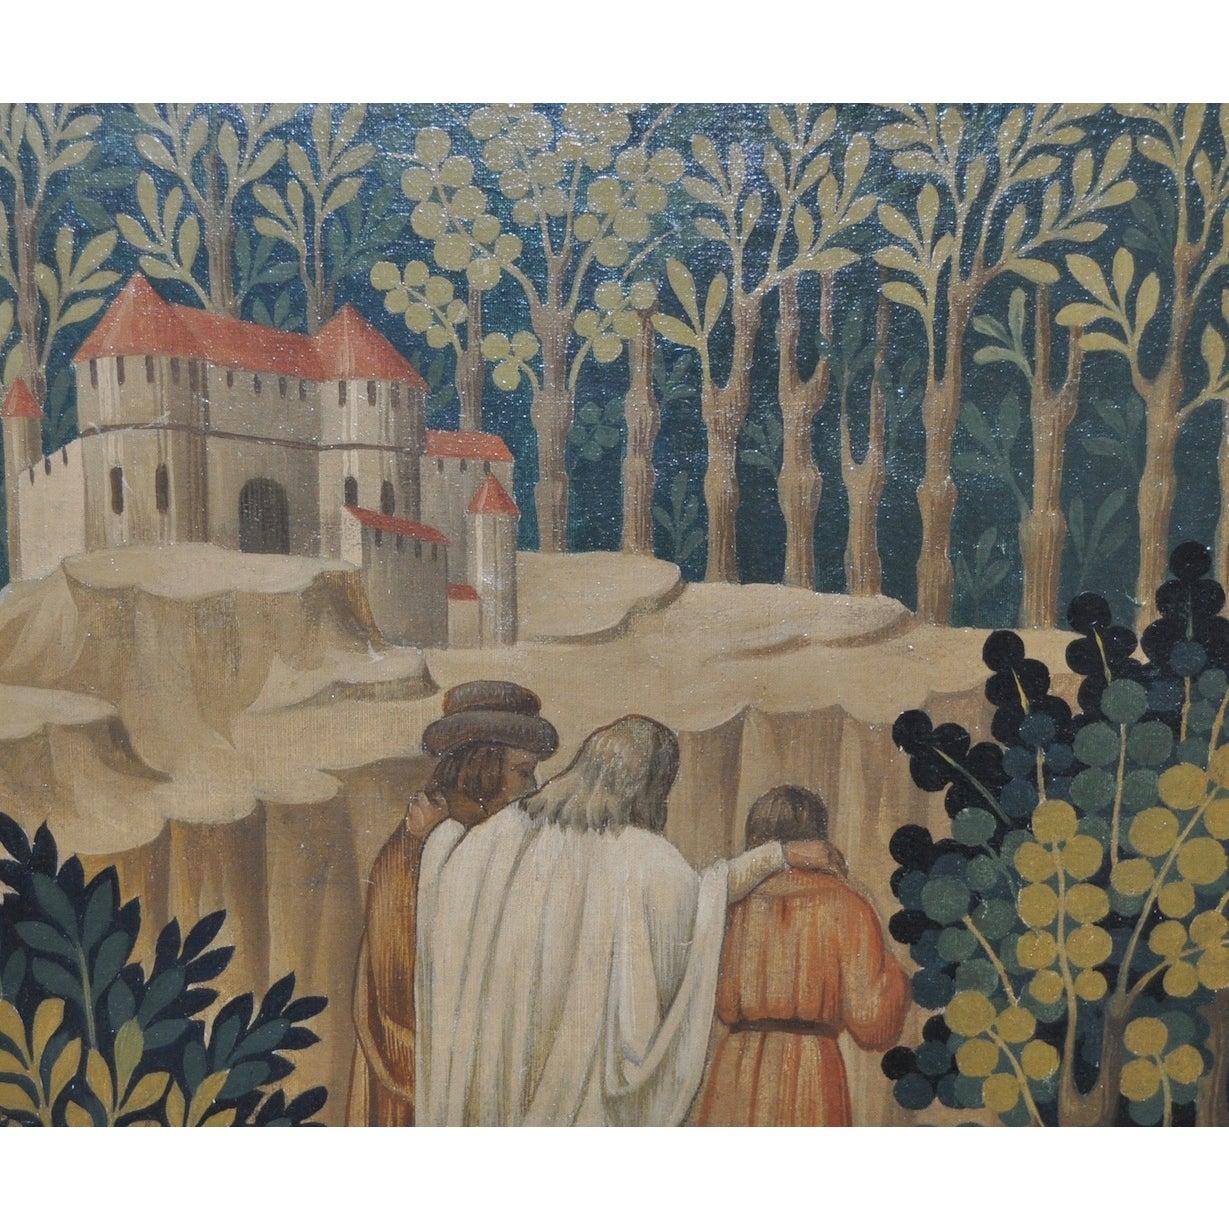 Outstanding Original Oil Painting by Mystery Artist c.1950s

The quality of this painting cannot be overstated. Fine oil on paper on canvas, with a touch of Art Nouveau influence.

A scene from William Shakespeare's 